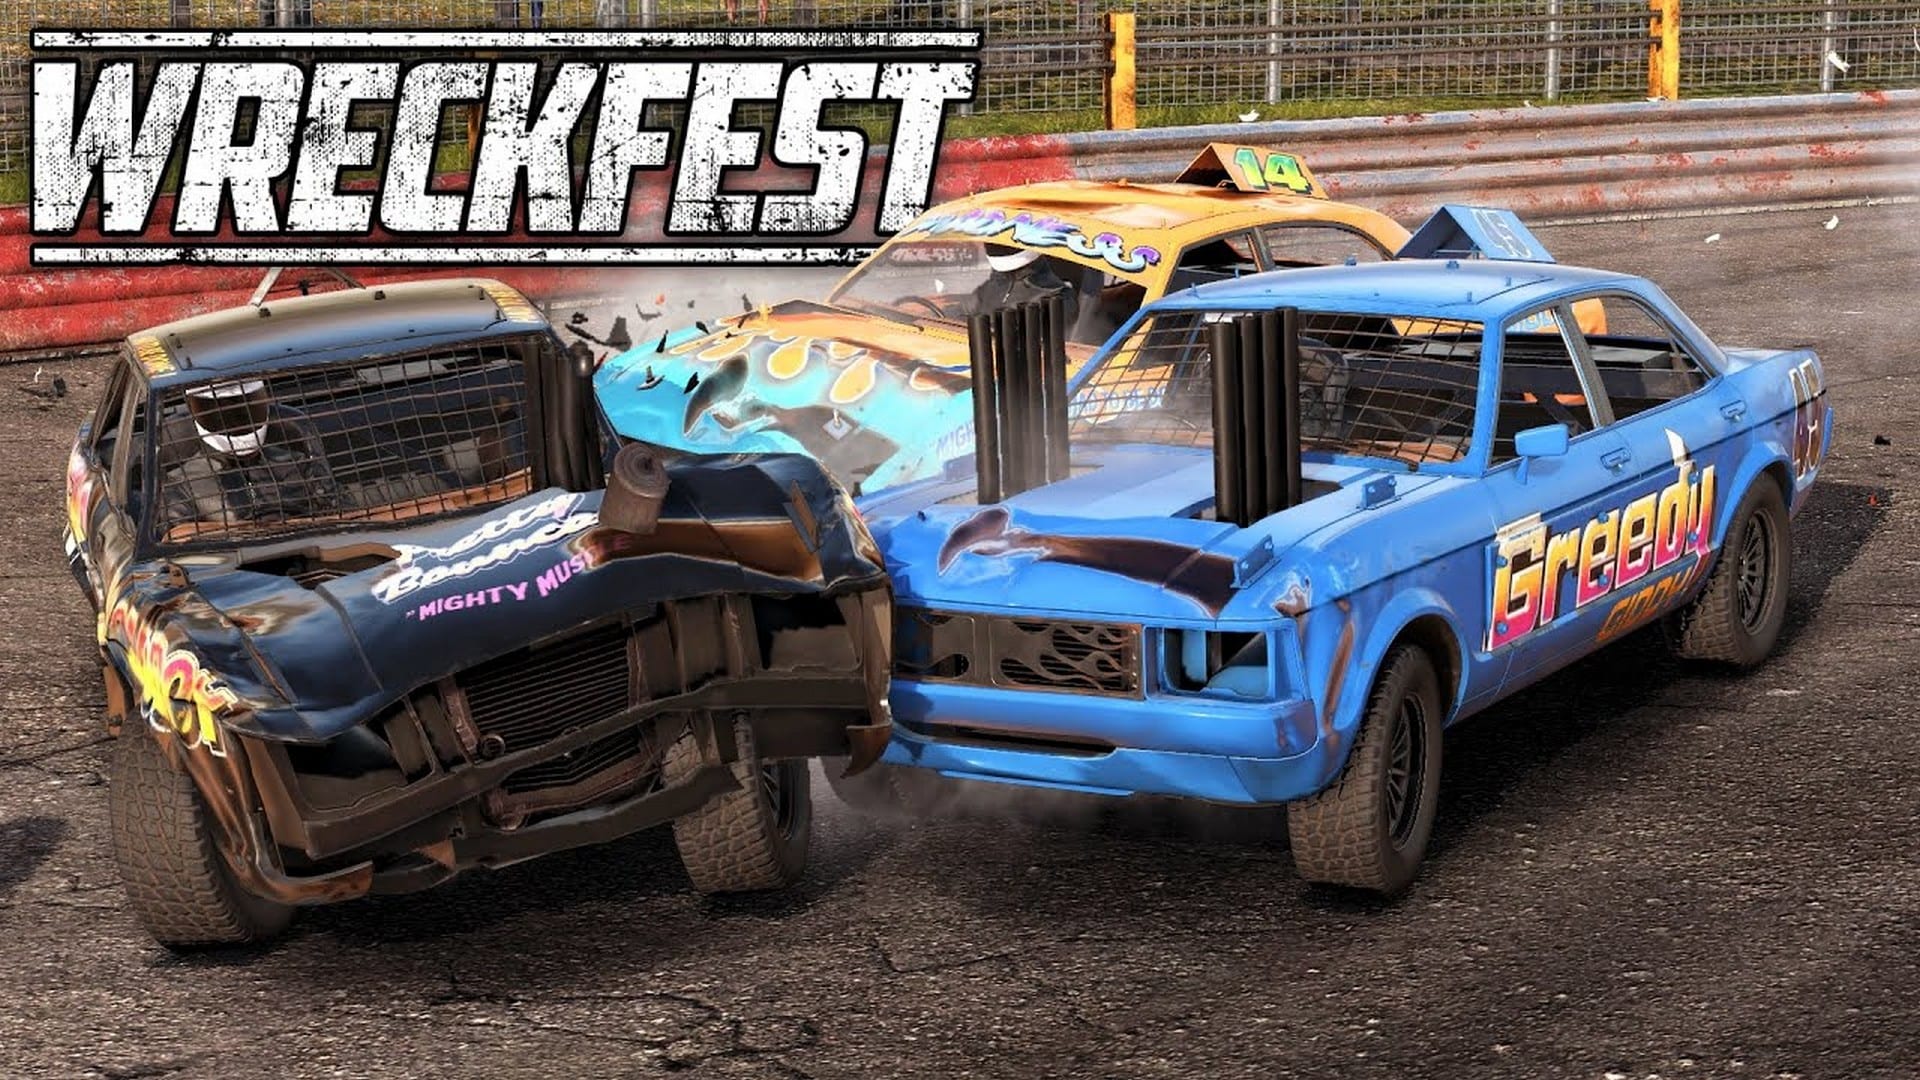 Wreckfest Concludes Its First Season With The Eighth DLC, The Banger Racing Car Pack